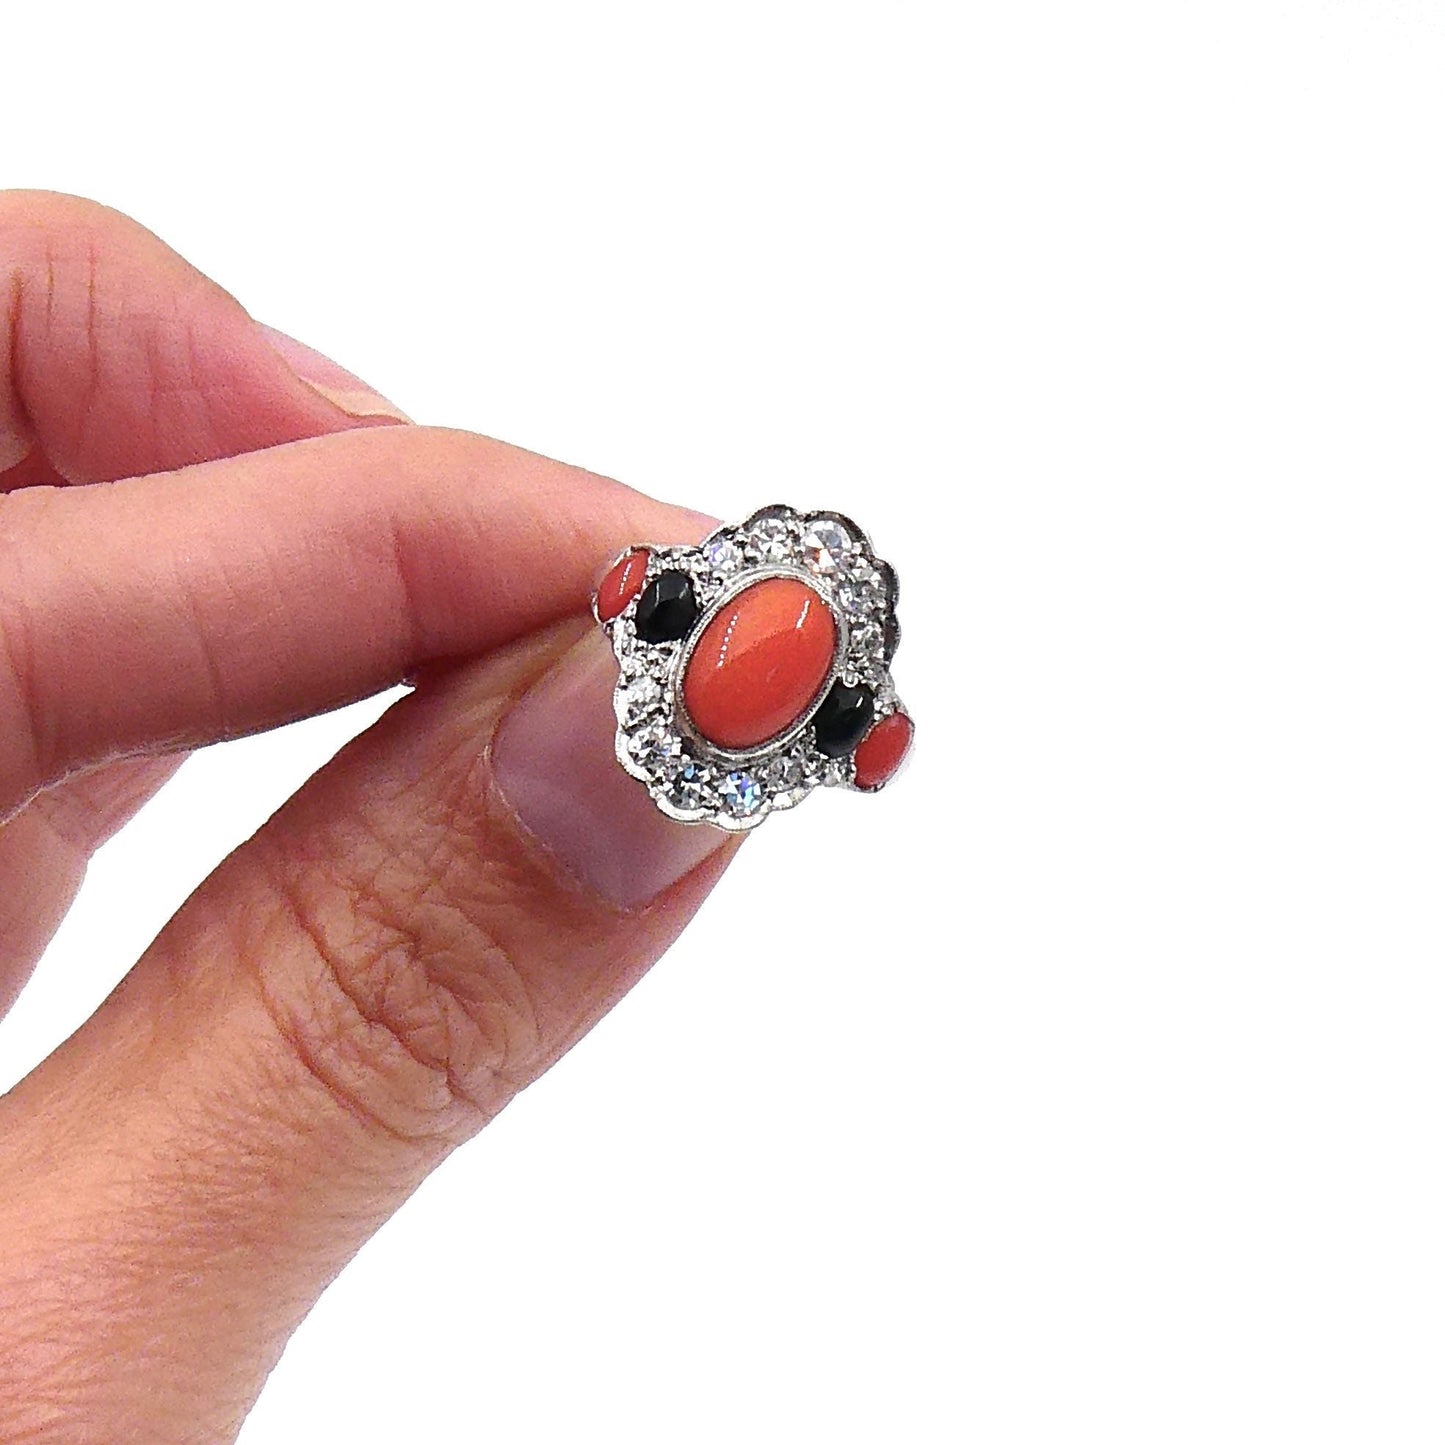 Vintage coral ring, set with onyx and diamonds, an art deco style onyx ring. - Collected